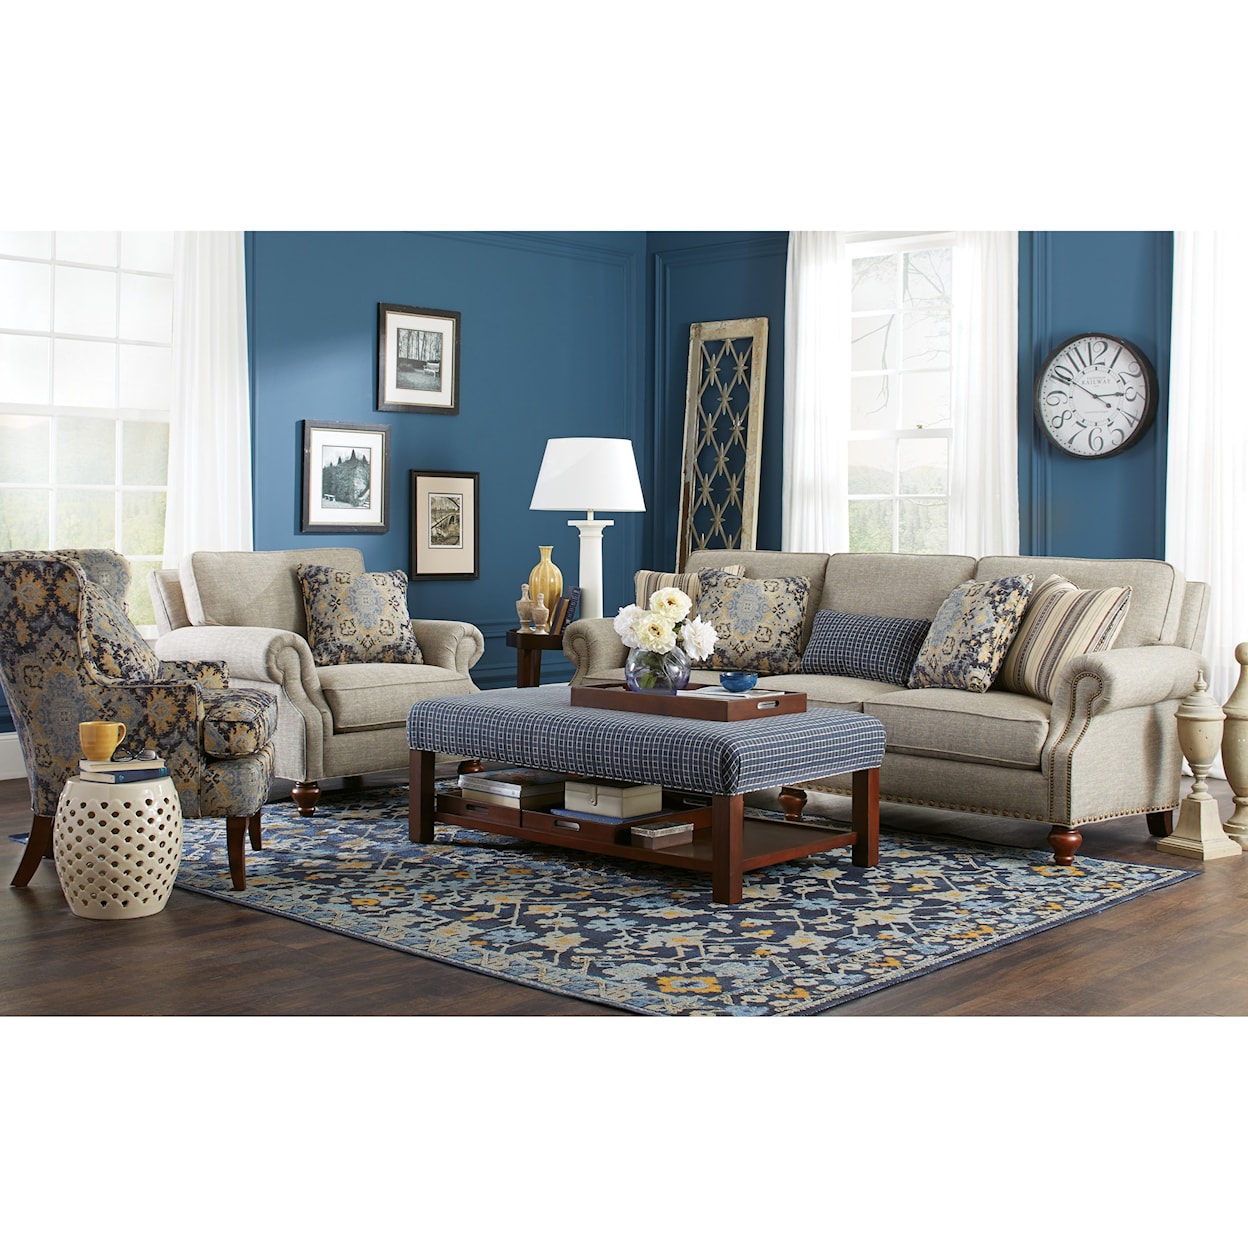 Craftmaster 7623 Living Room Group